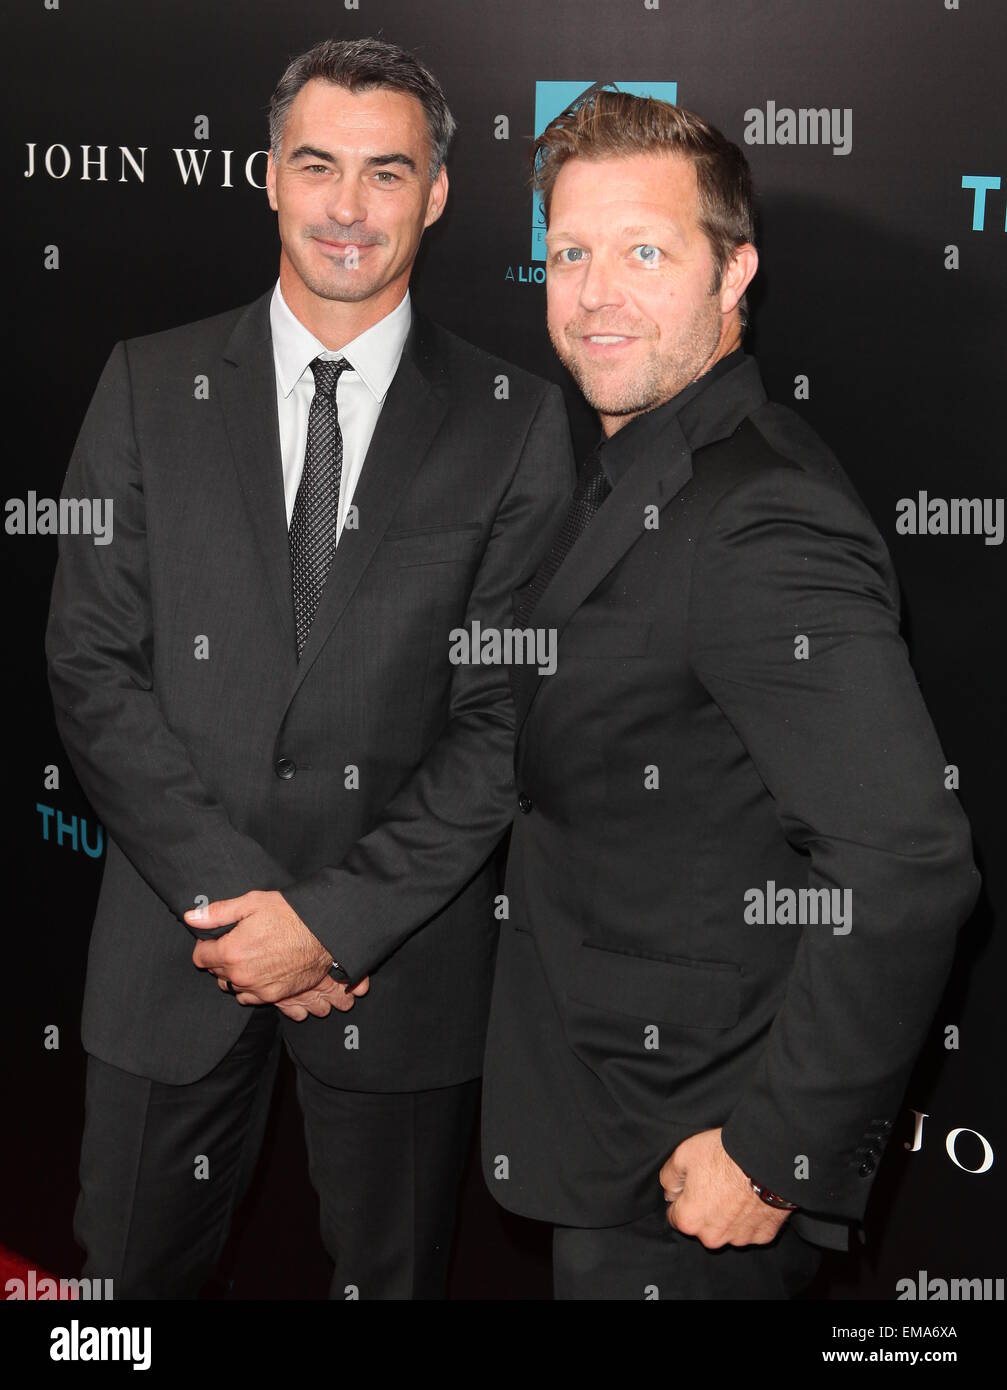 New York special screening of 'John Wick' at Regal Union Square Stadium - Arrivals  Featuring: Chad Stahelski,David Leitch Where: New York, United States When: 13 Oct 2014 Stock Photo